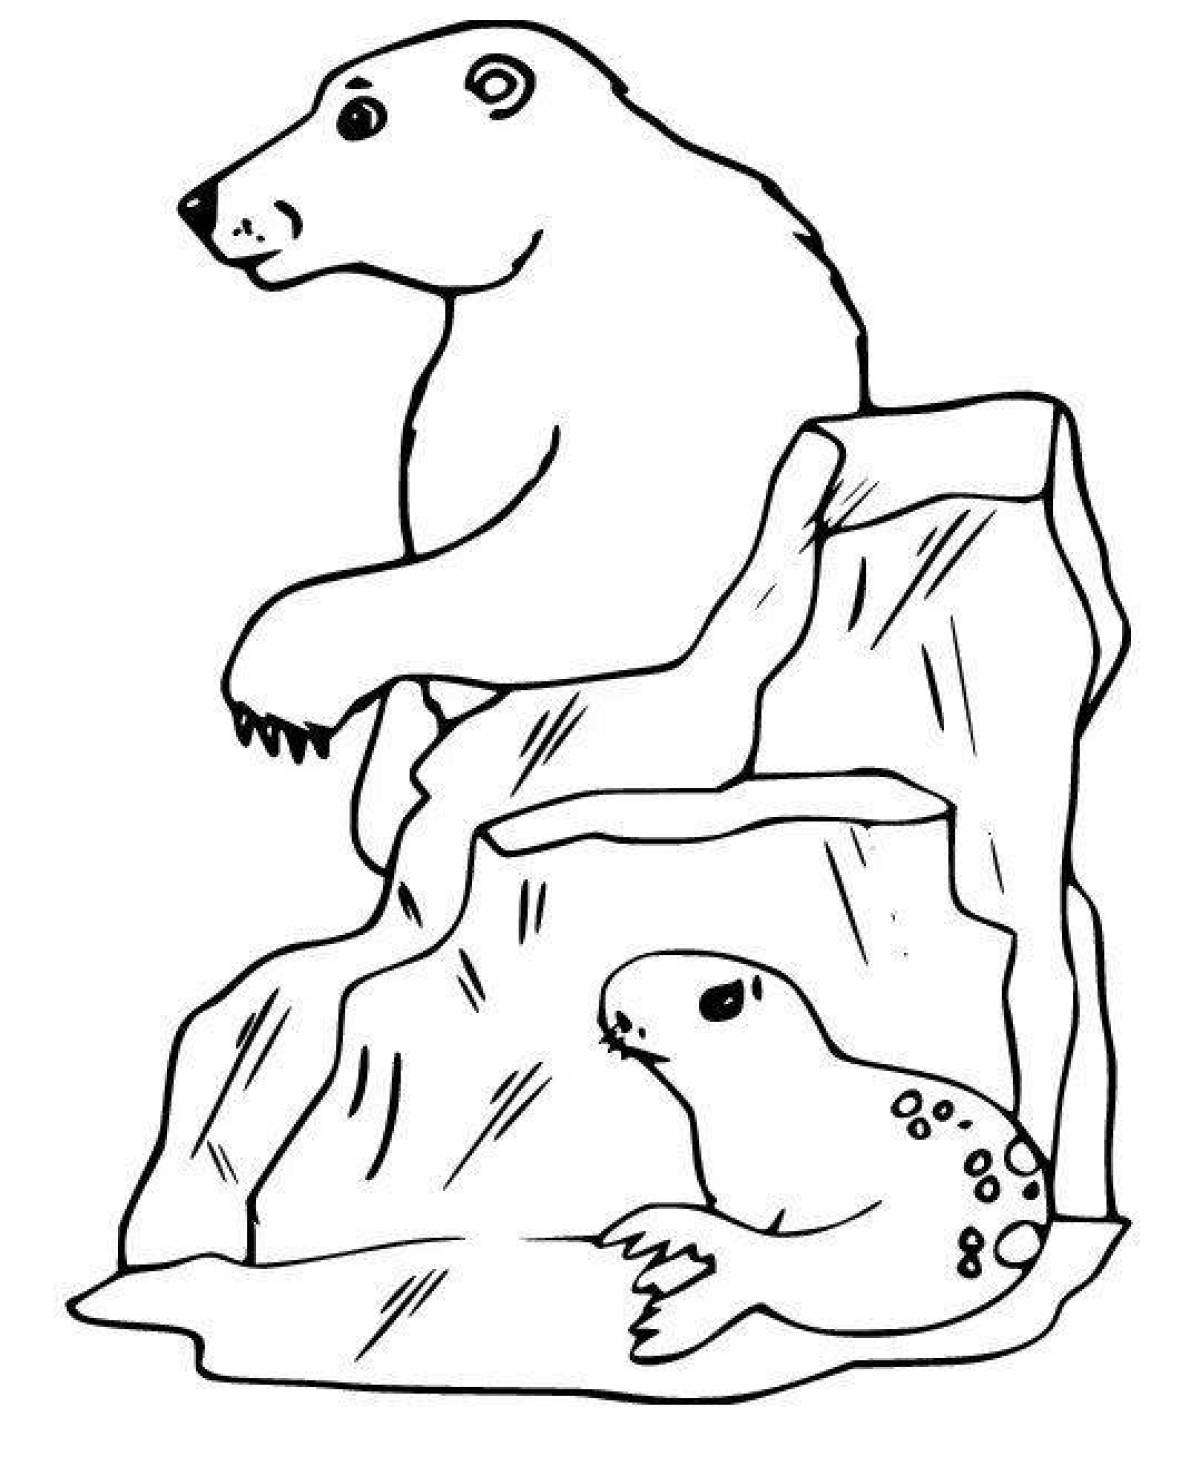 Outstanding arctic animals coloring pages for kids